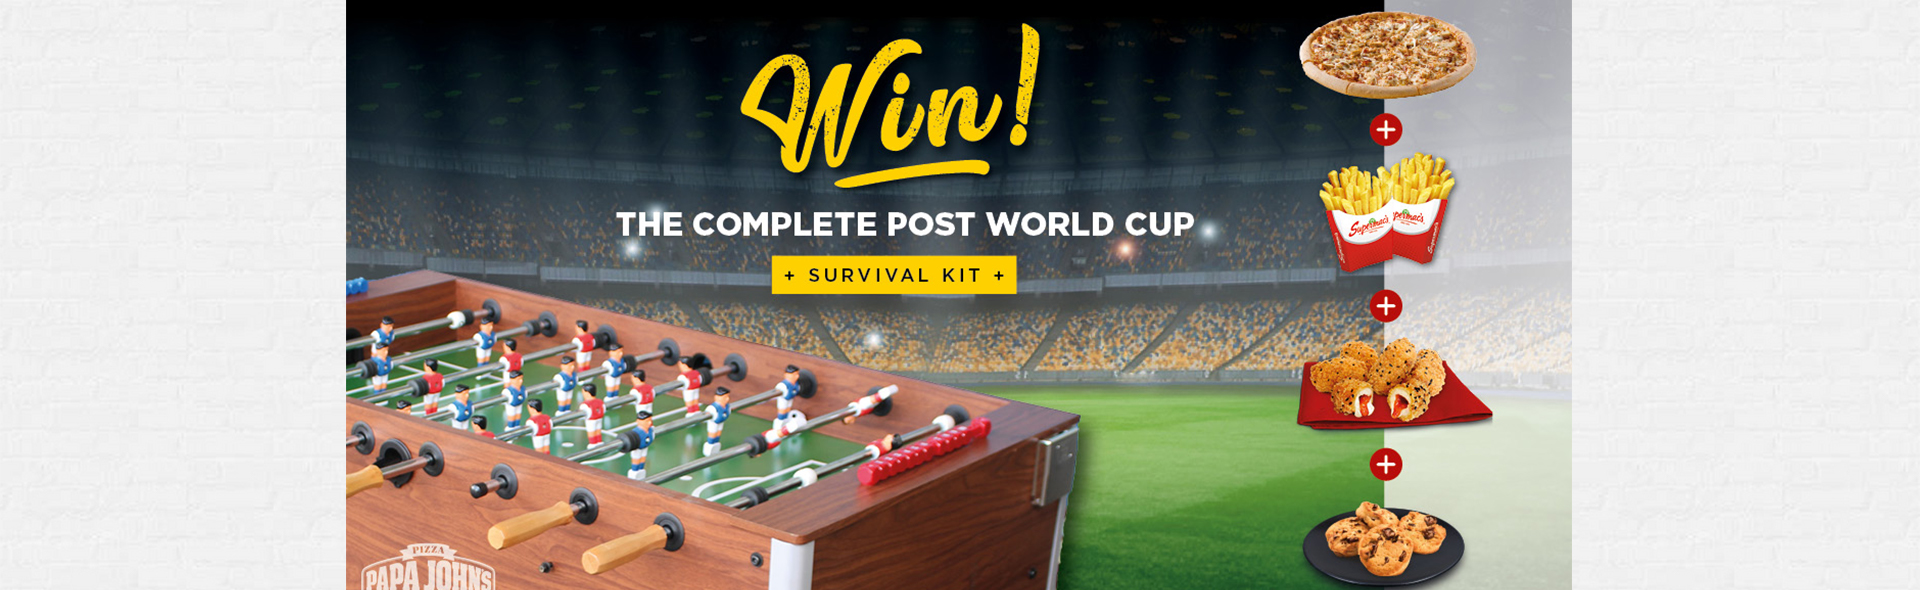 Complete Post World Cup Survival Kit